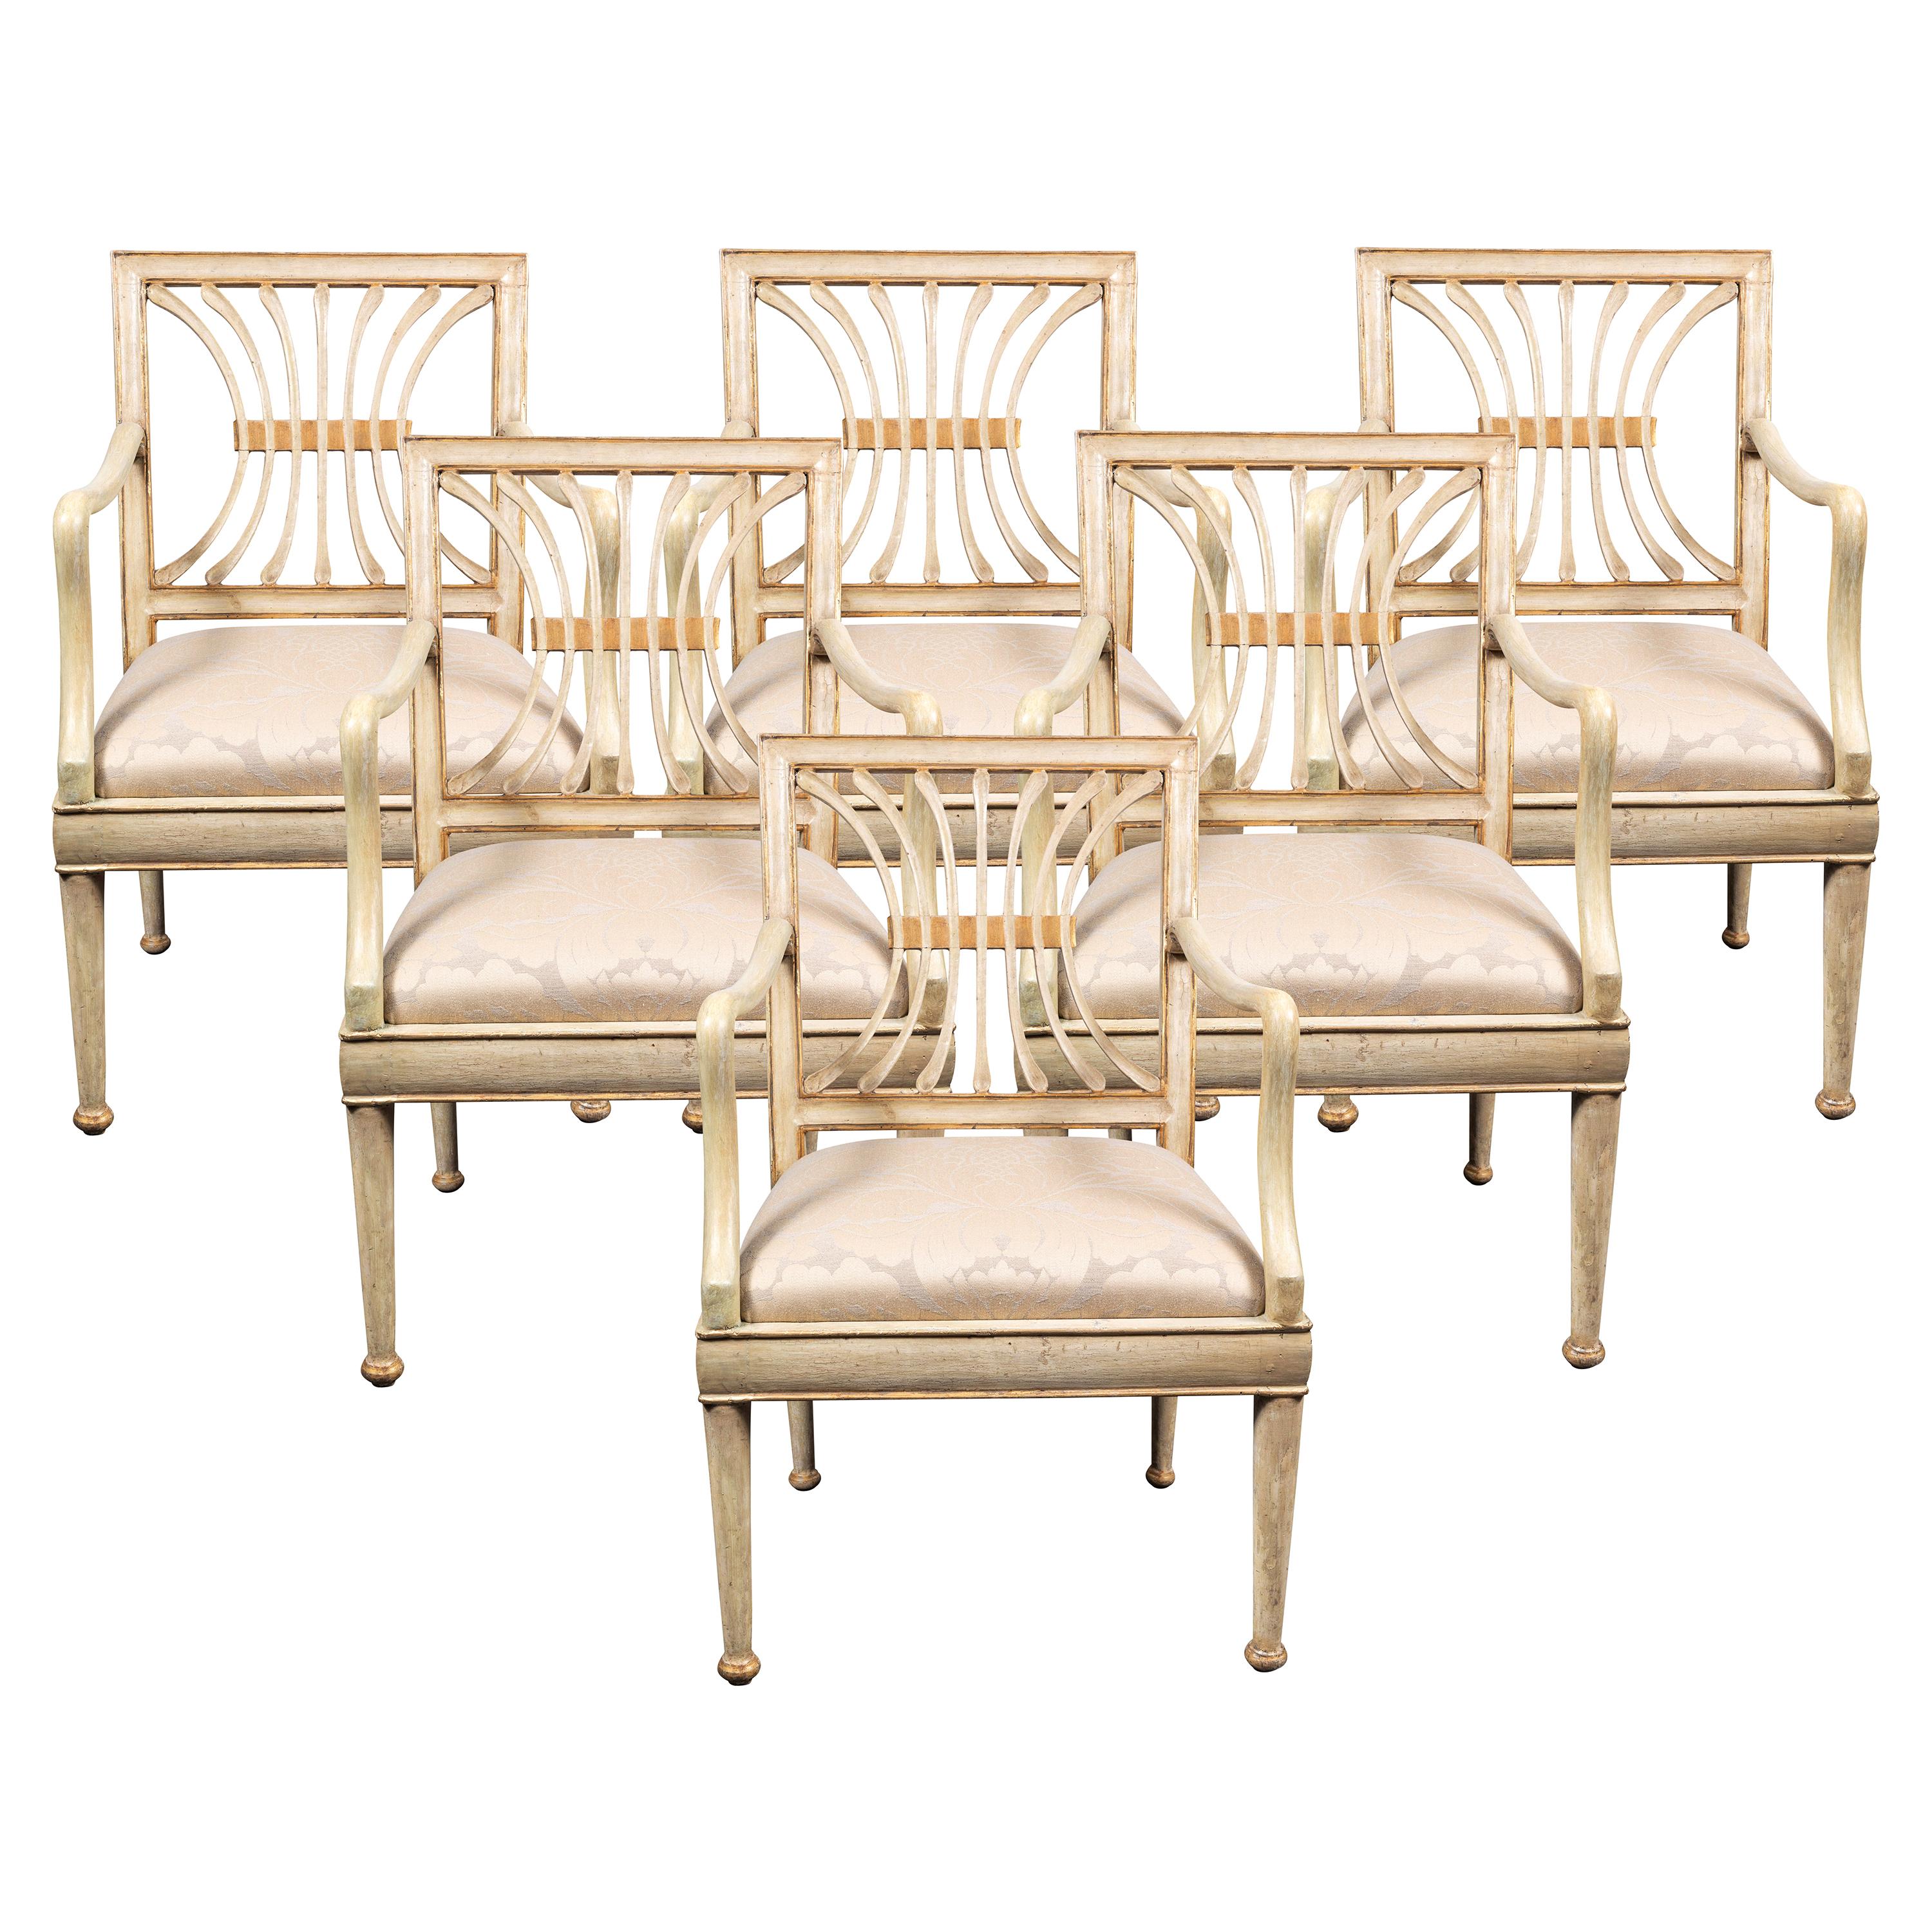 Suite of Antique Painted Chairs For Sale